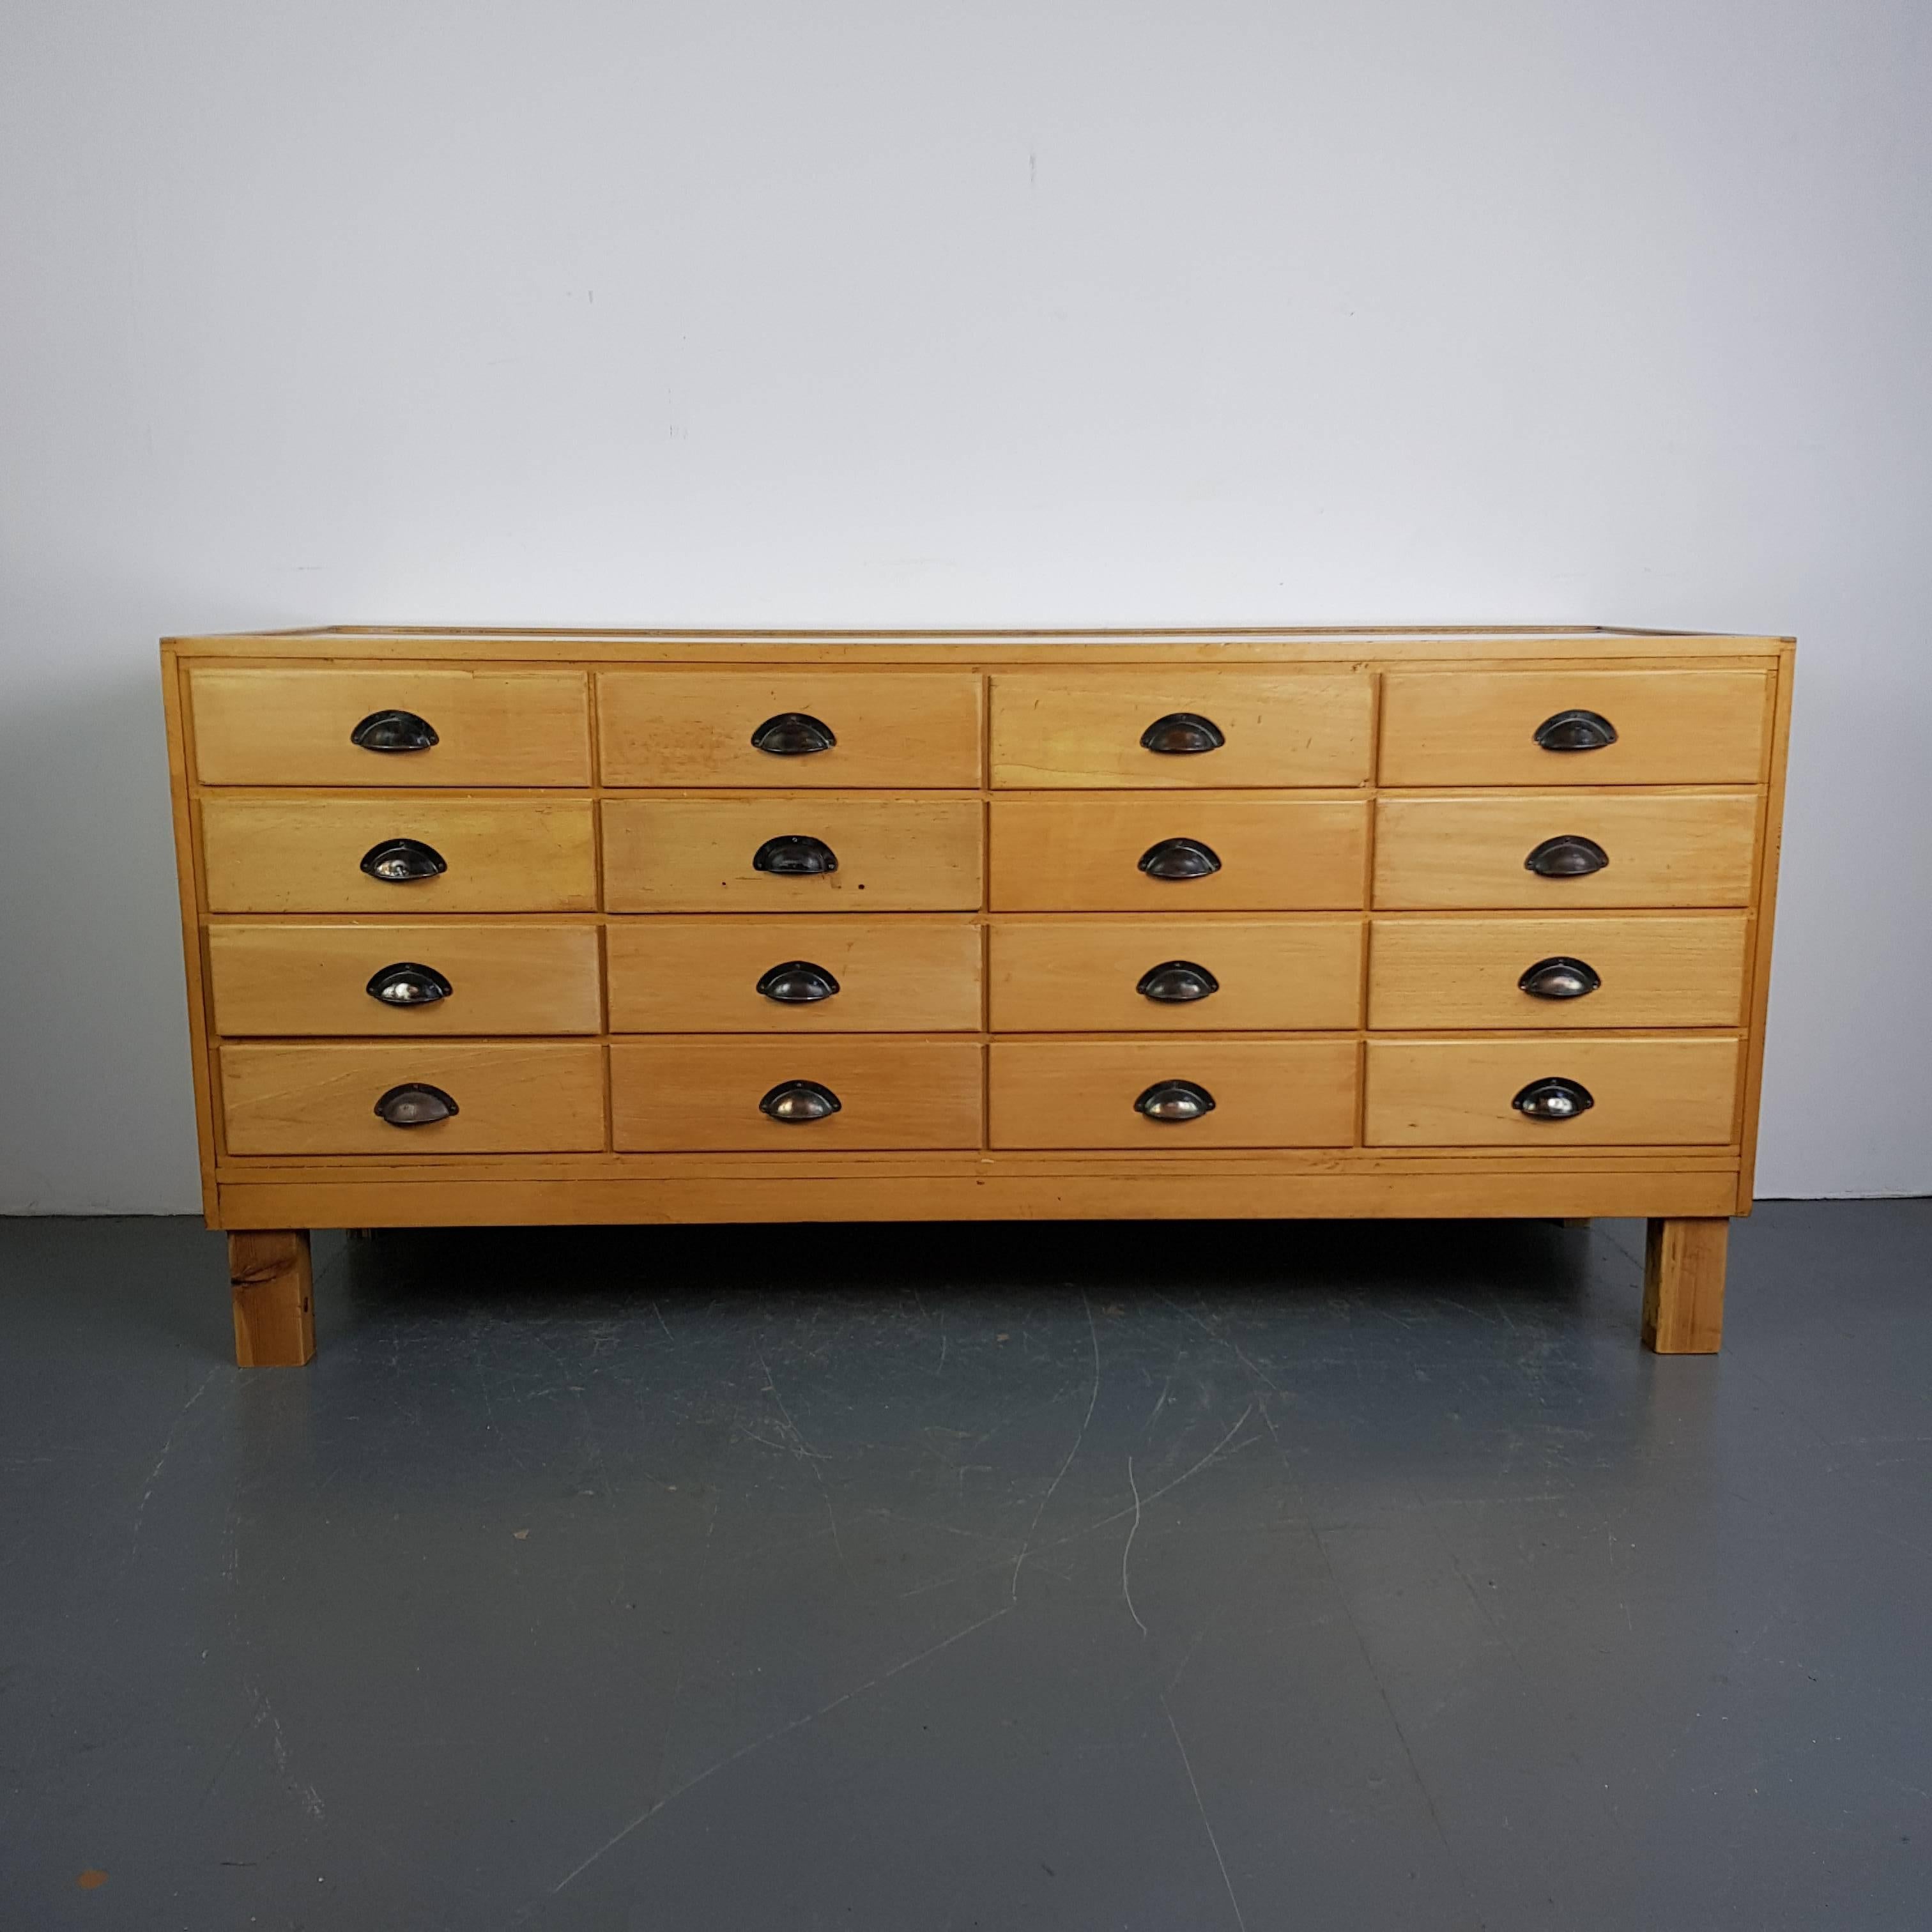 Lovely oak 16-drawer shop counter. Solid oak frame and drawer fronts. Glass casing. 

In good vintage condition. Some wear and tear commensurate with age, but nothing which detracts. Some small nicks and scuffs here and there.

If you bear in